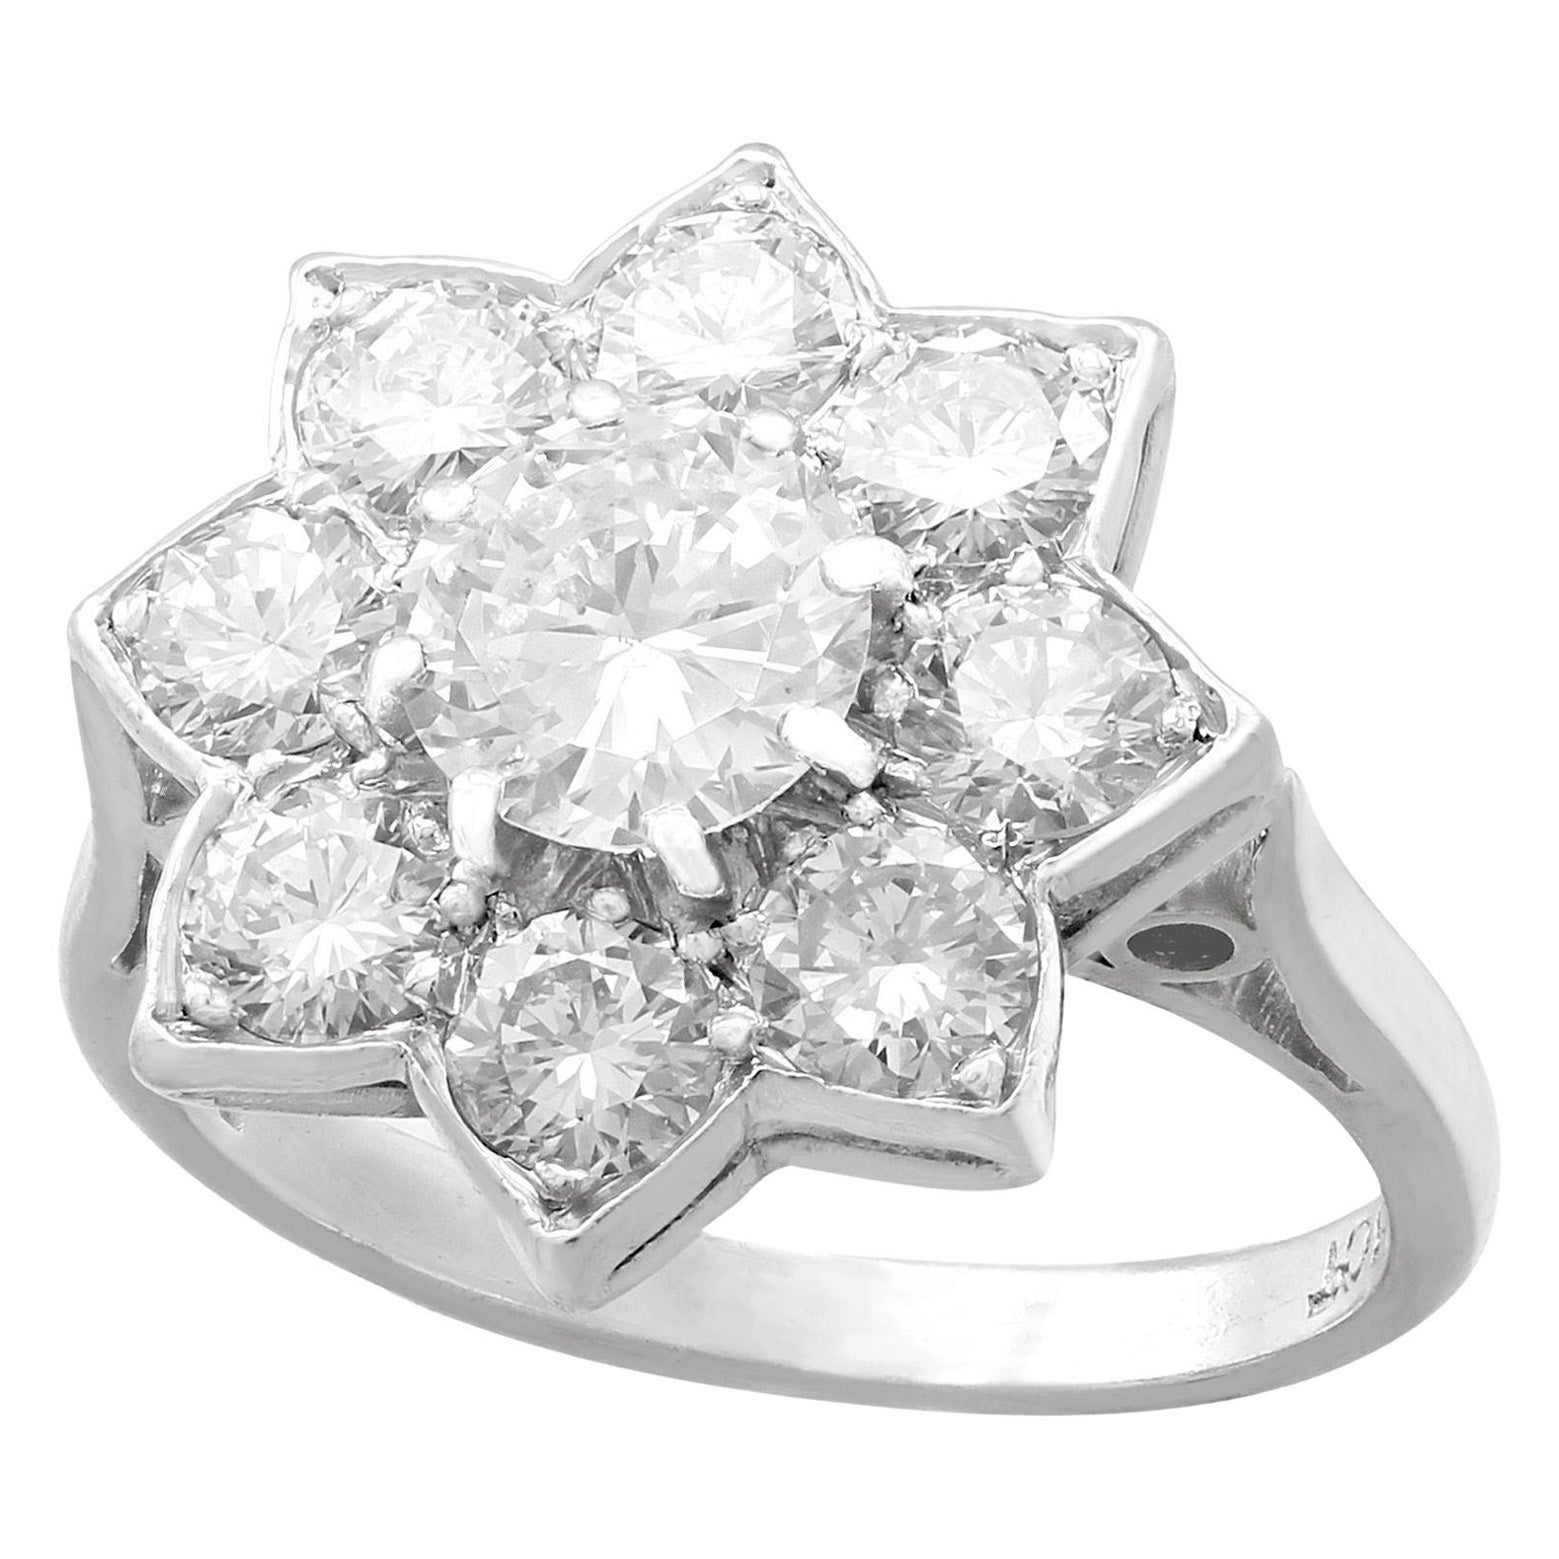 1940s 1.87 Carat Diamond and White Gold Cluster Ring For Sale